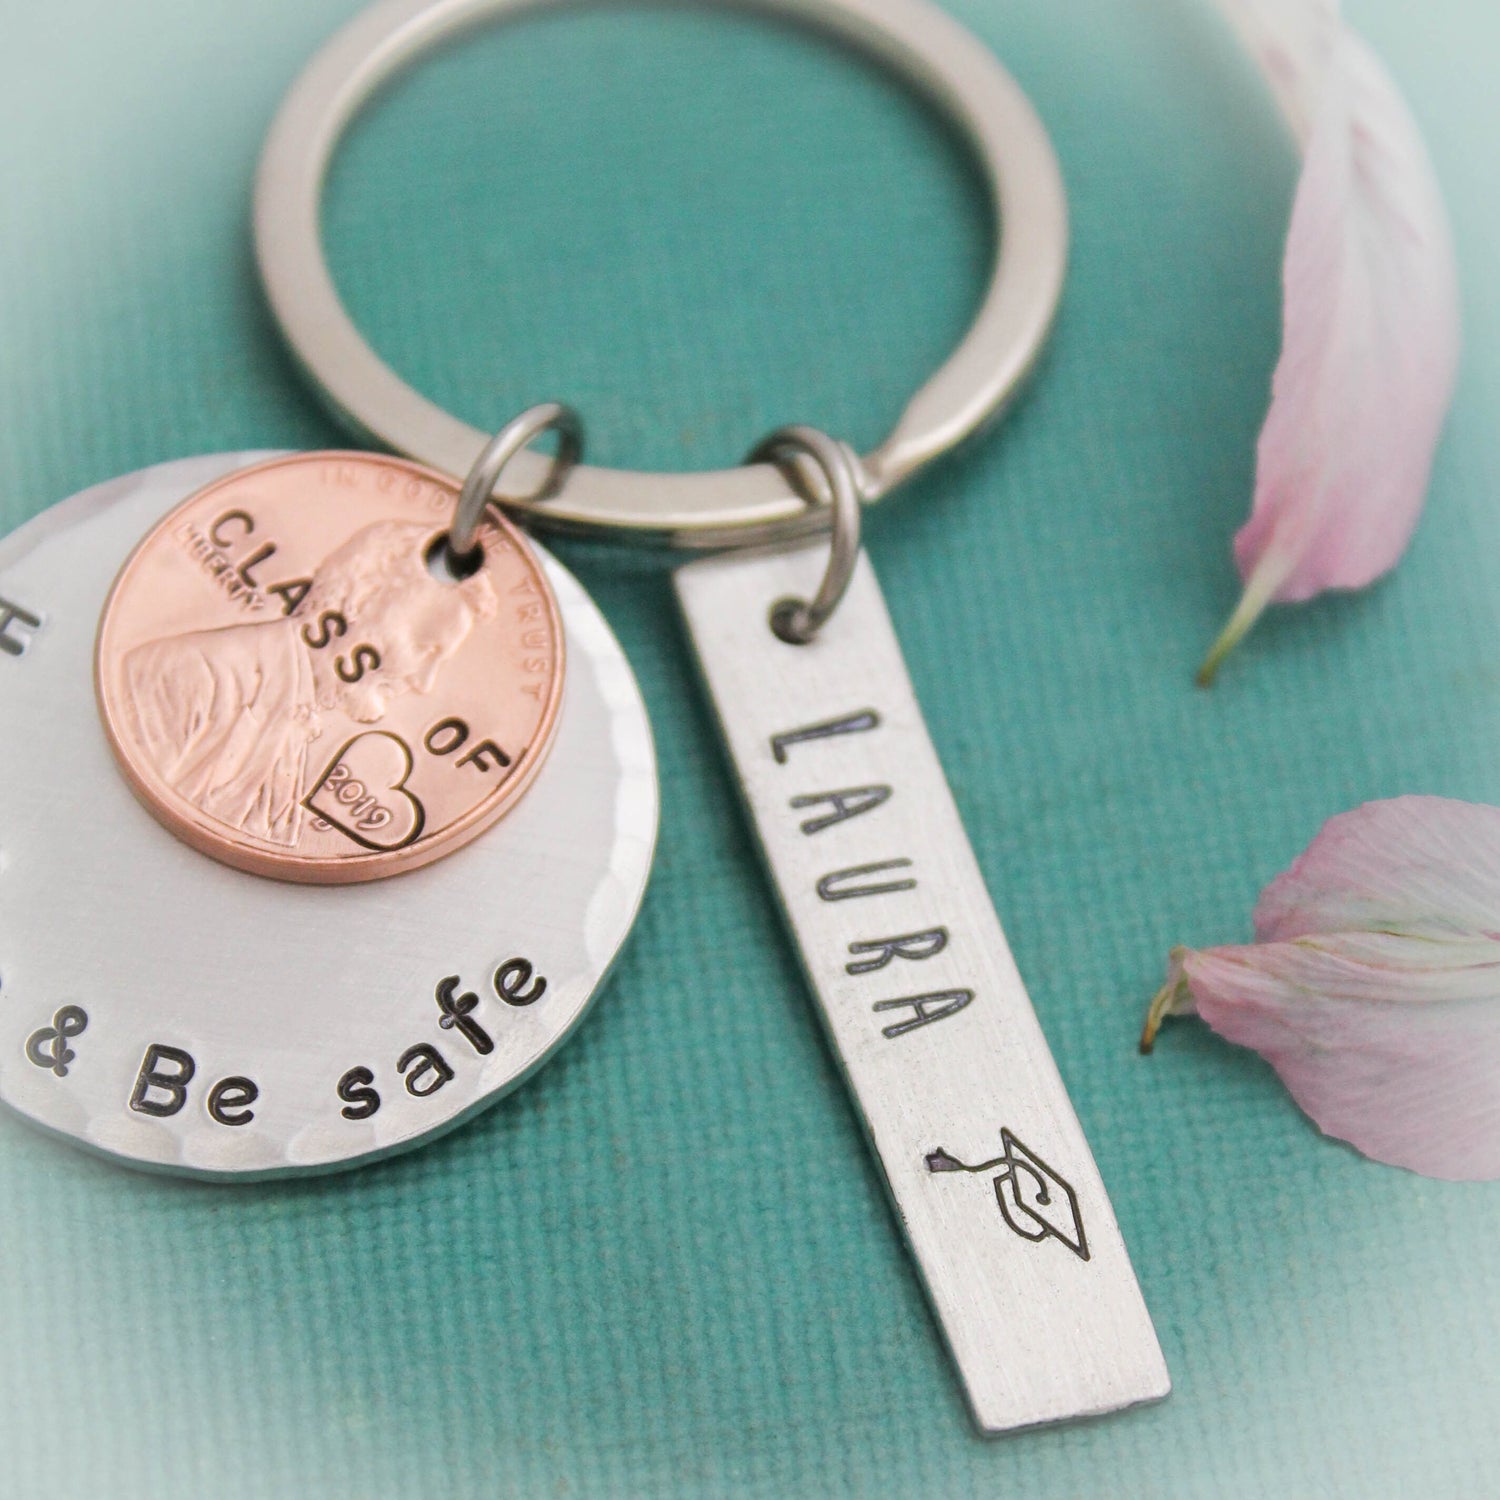 Personalized Lucky Keychain, Have Fun Be Safe Keychain Grad Gift, Lucky Grad Keychain, Graduation Gifts, Lucky Penny Keychain, Graduate Gift